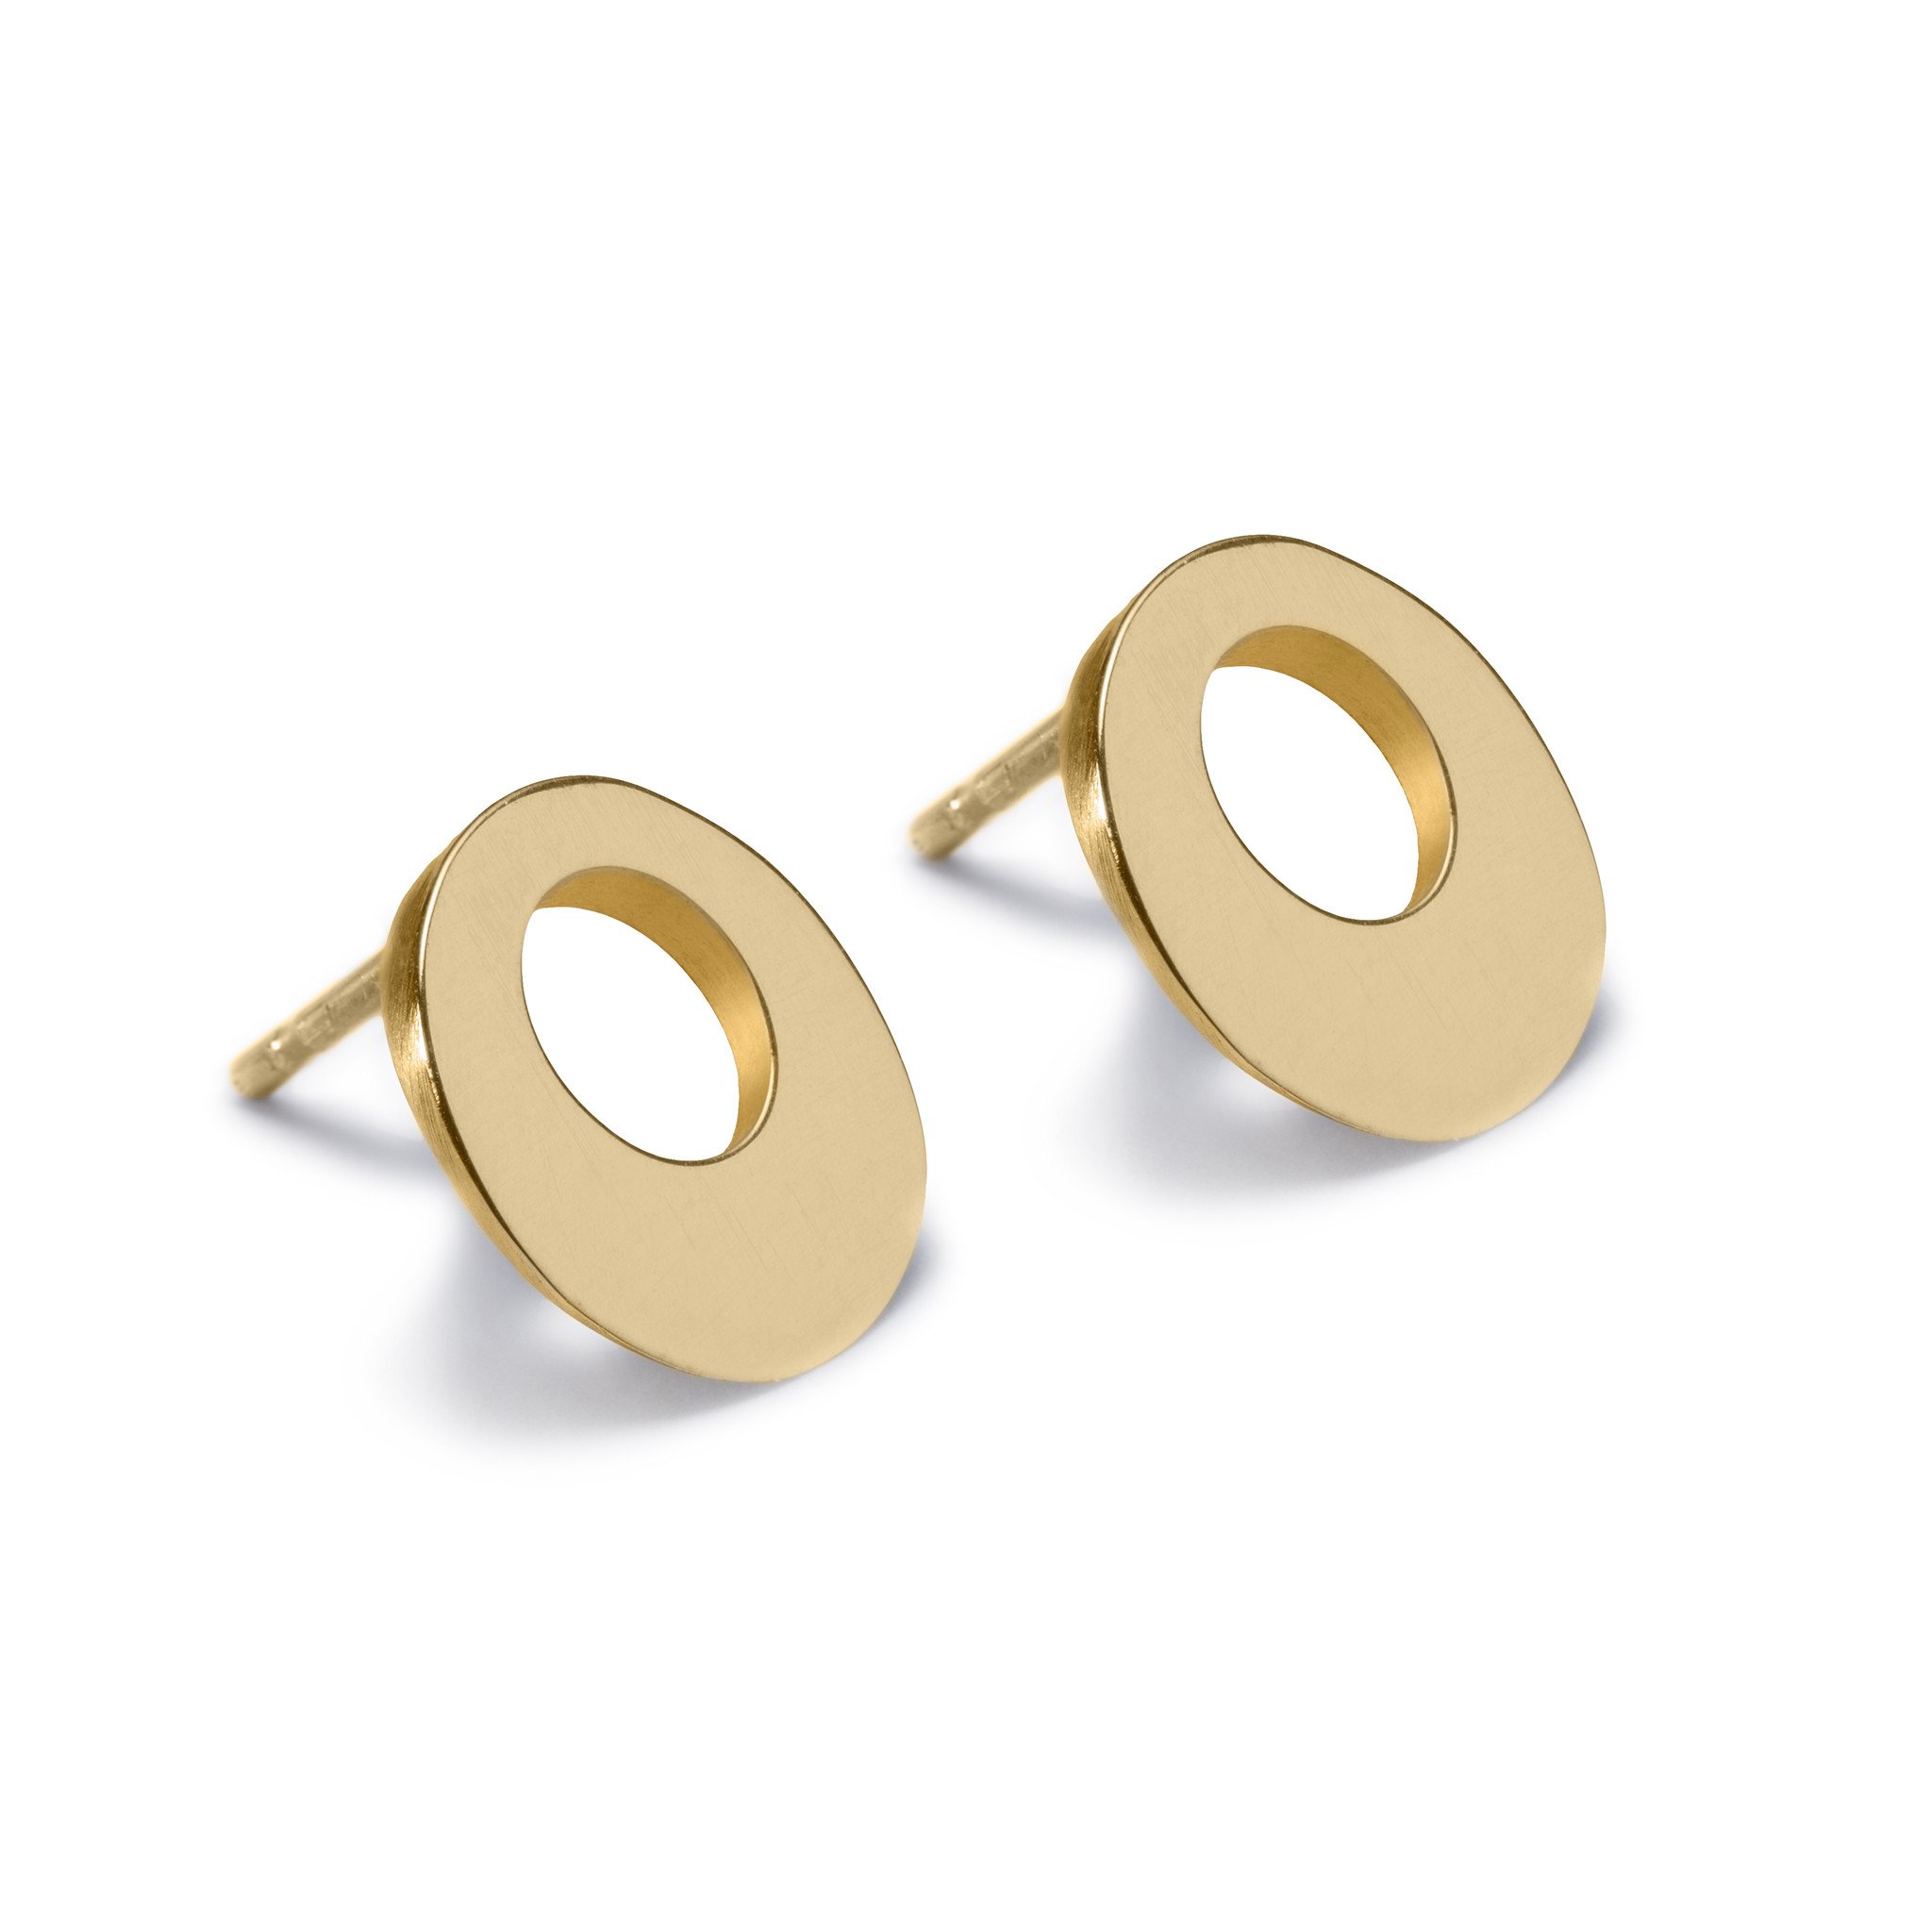 Circle of Dreams Gold Stud Earrings. Unique designer jewellery handcrafted in Ireland.